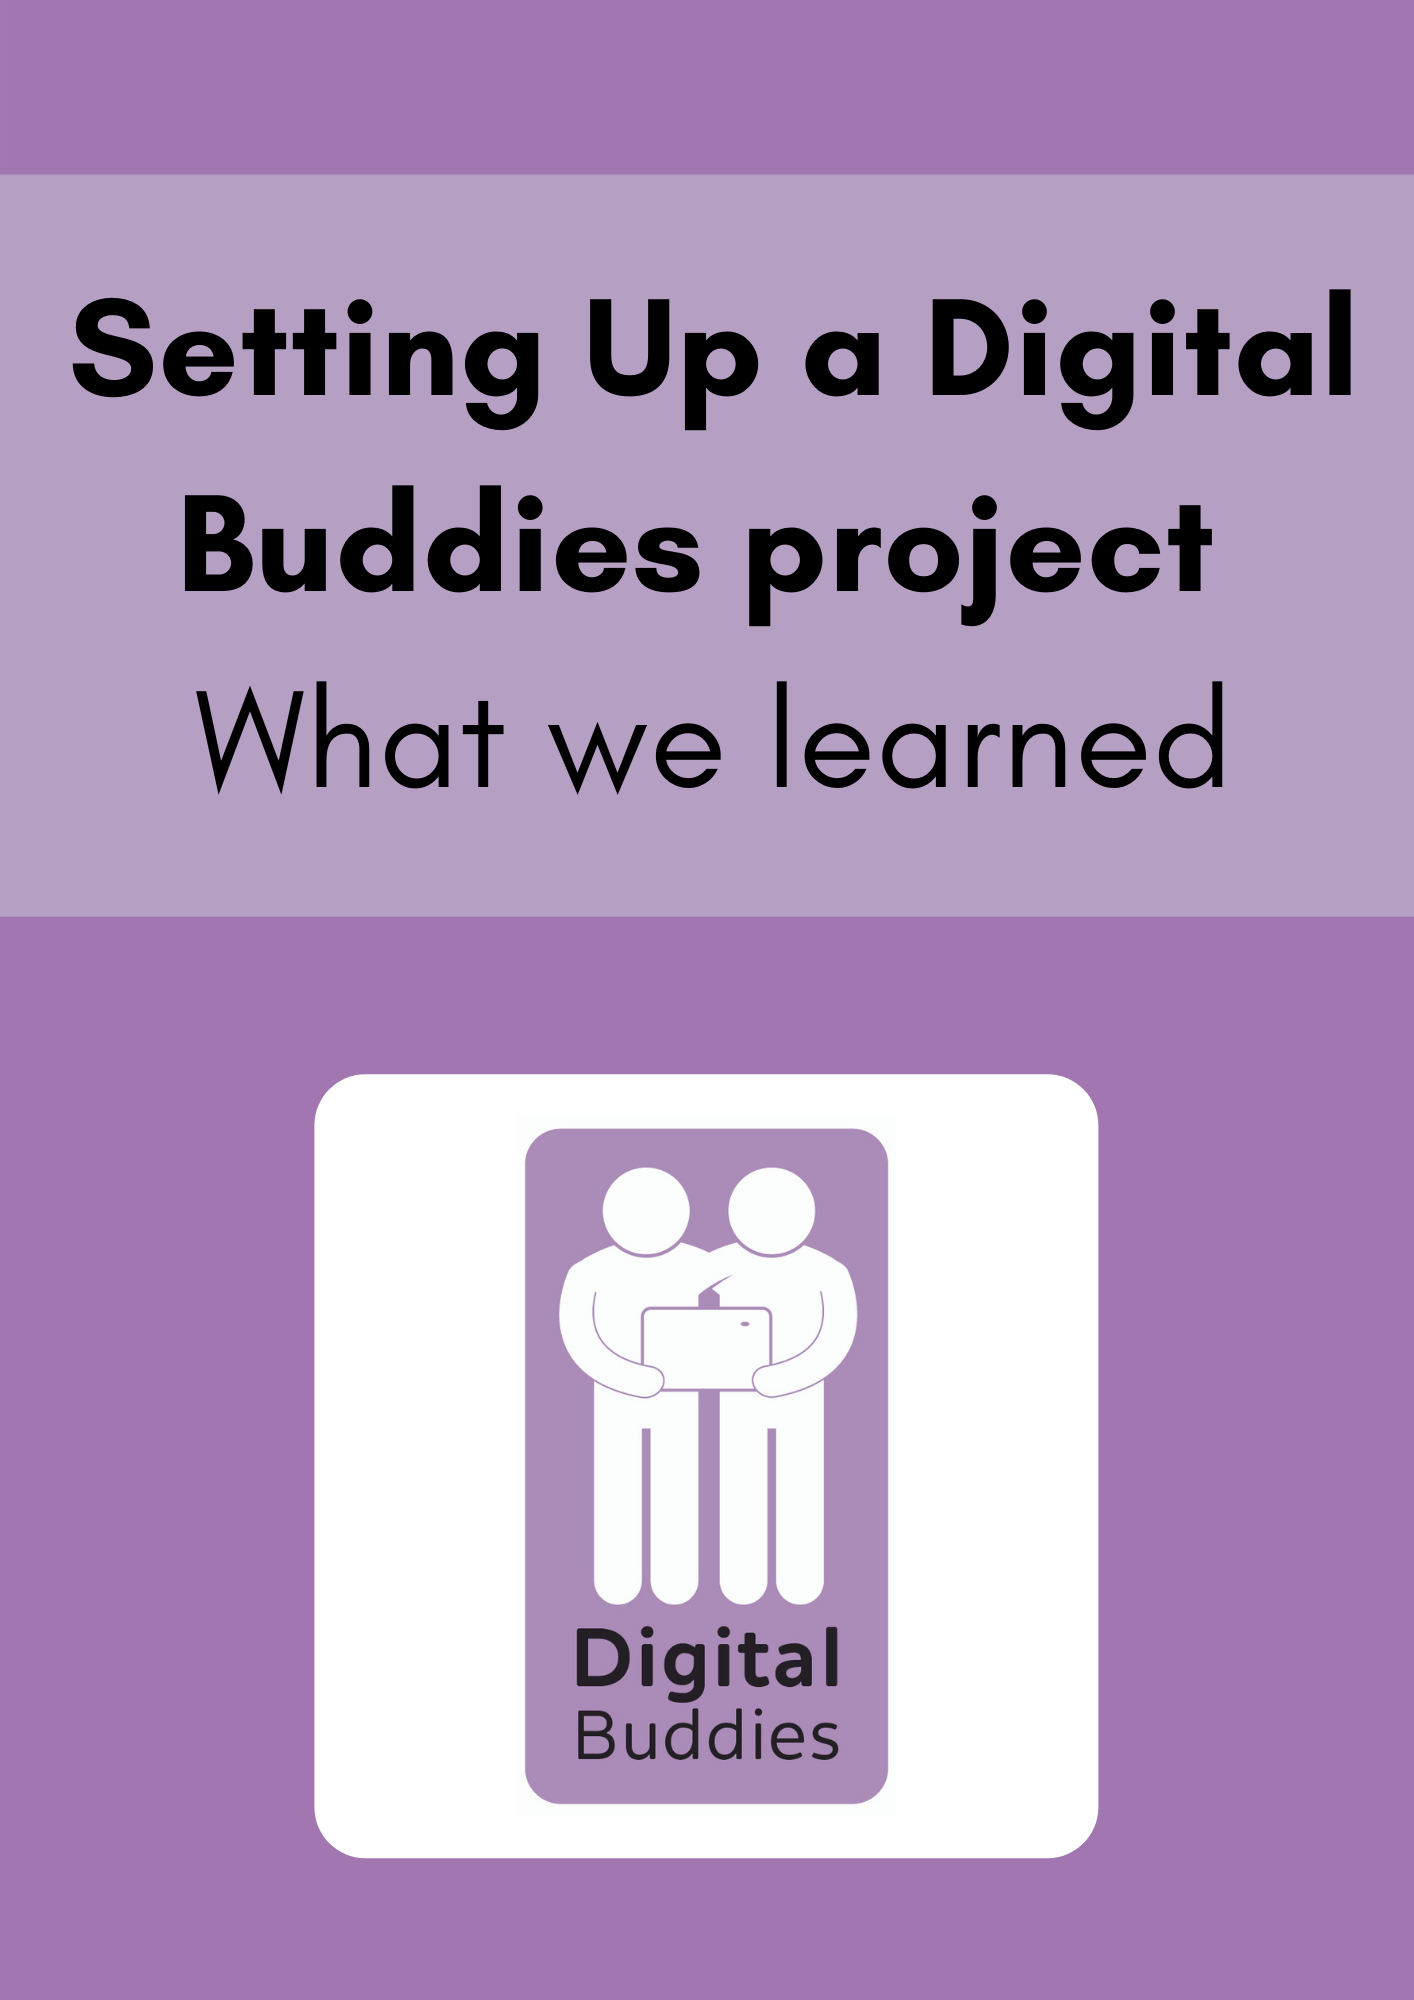 Setting up a digital buddies project. What we learned.